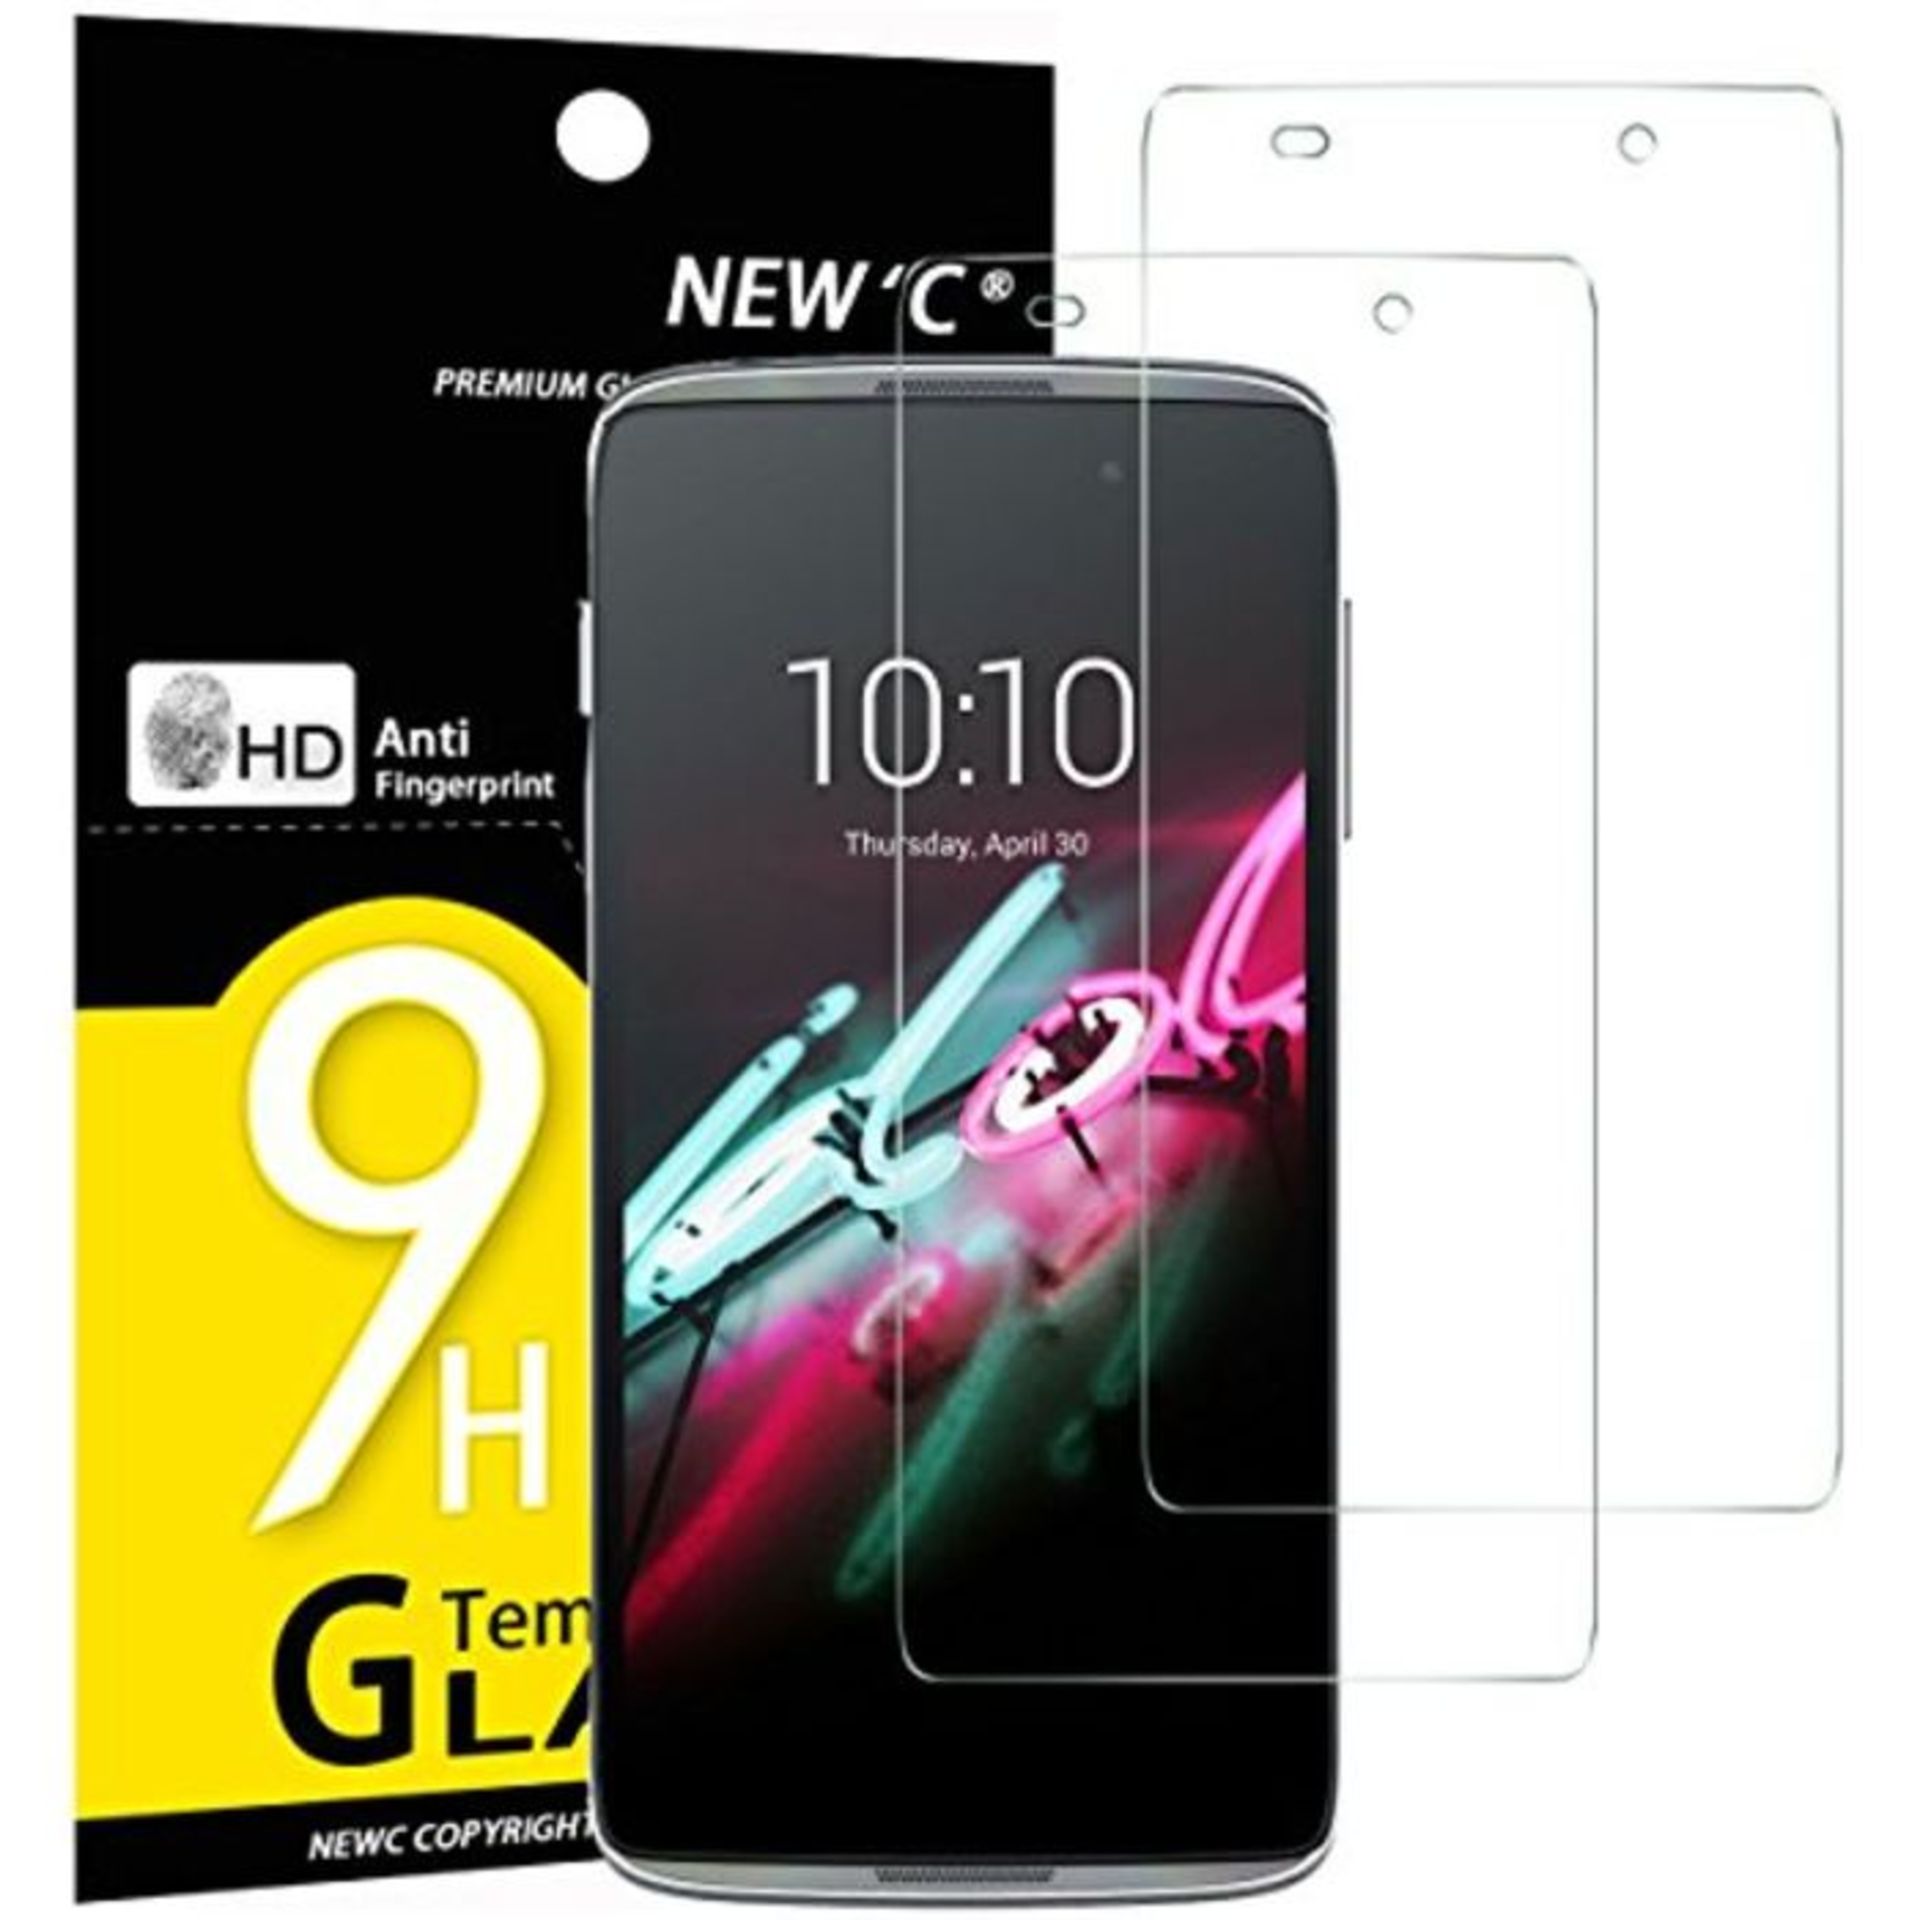 NEW'C Pack of 2, Glass Screen Protector for Alcatel One Touch Idol 3 (4.7), Anti-Scrat